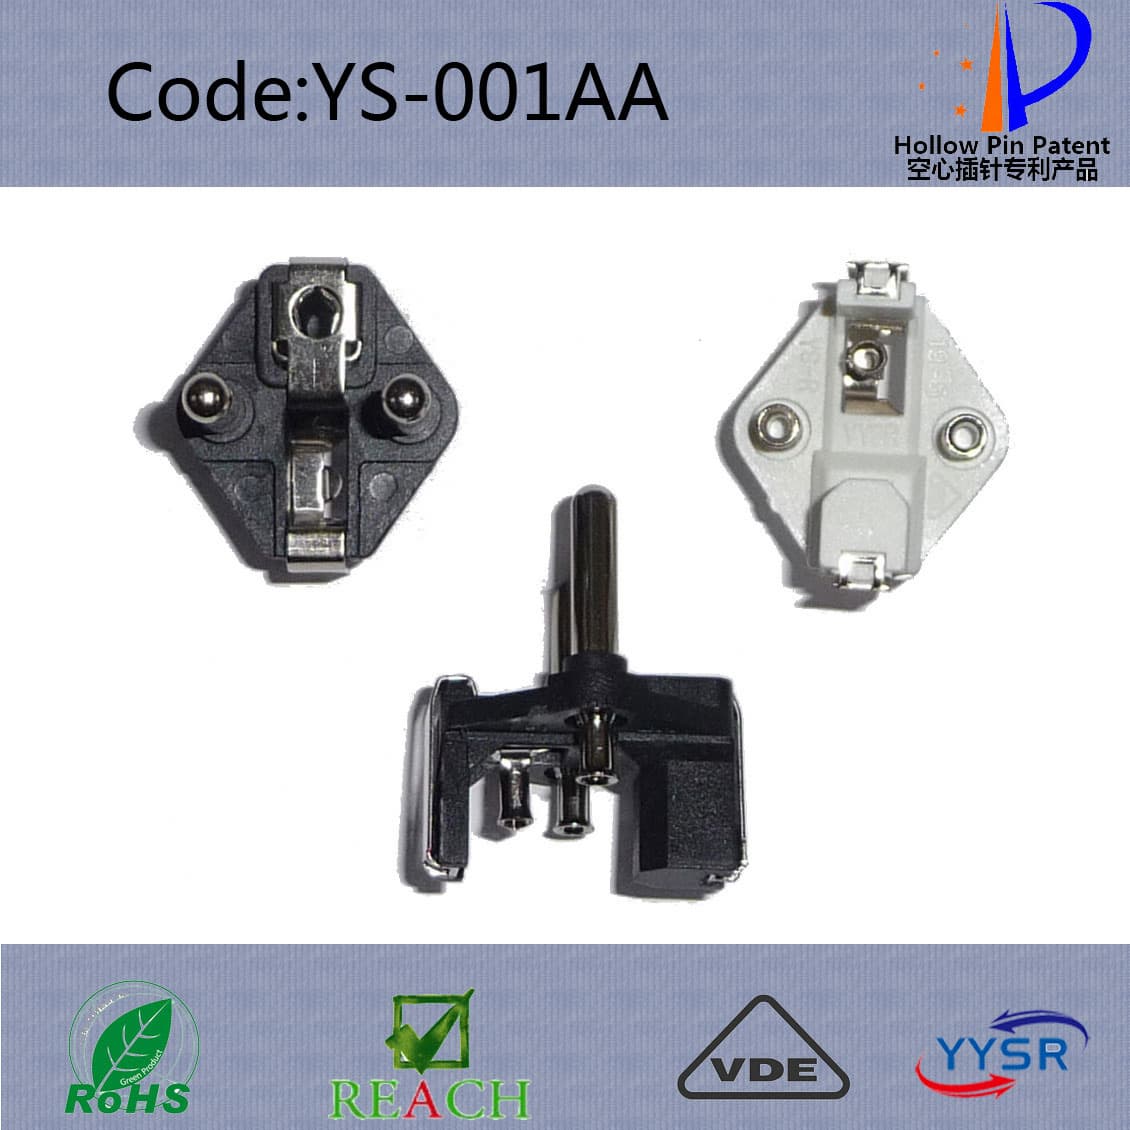 plug insert for power cord